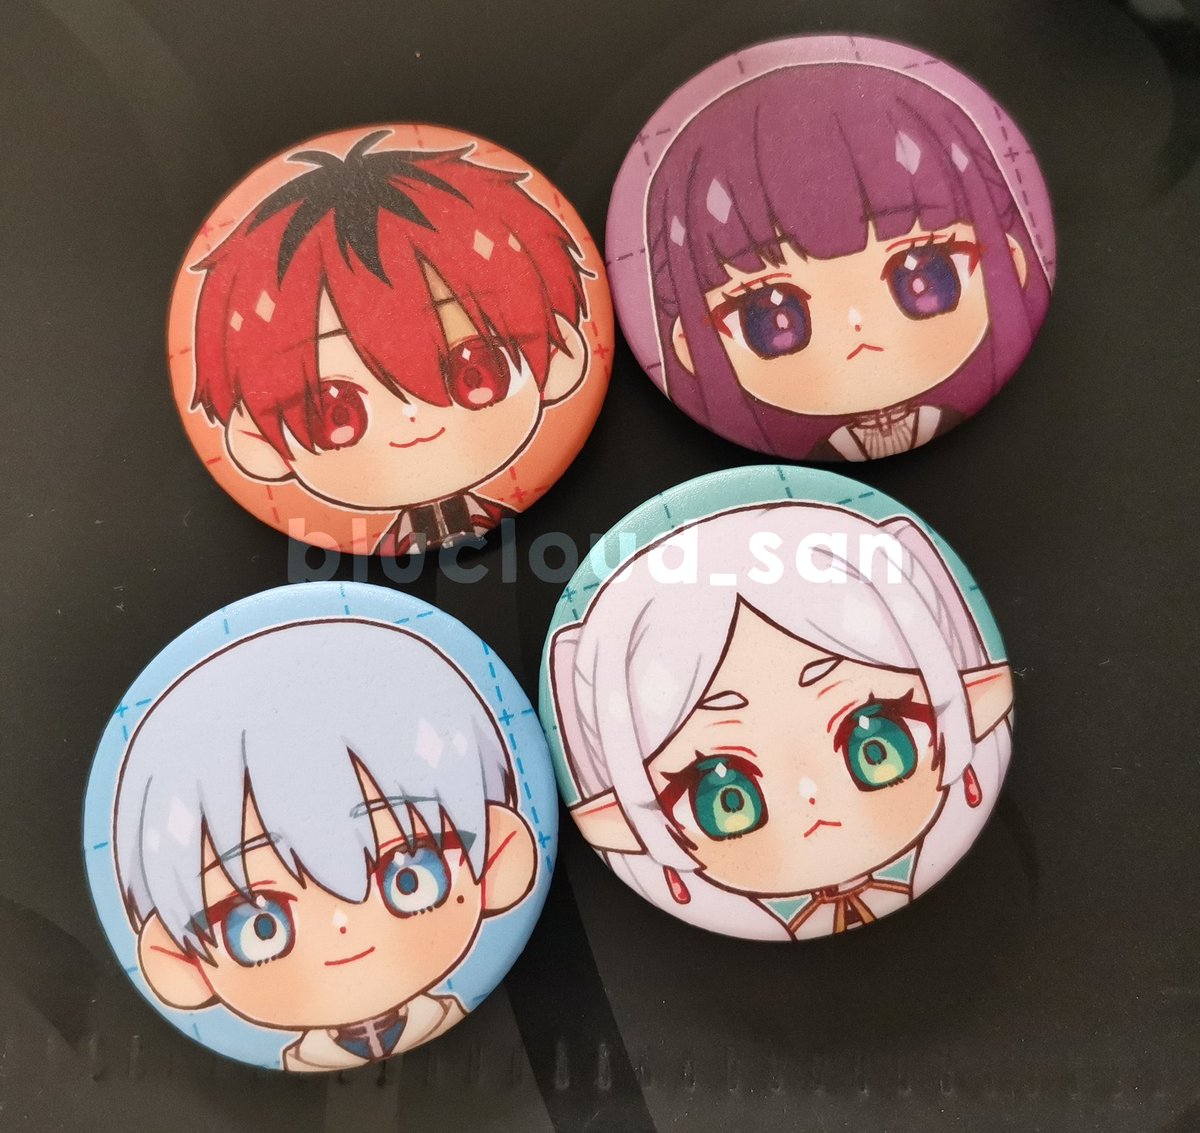 Made new pins for Mindworks last week ^^

(Frieren pins were sold out really quickly ;;)